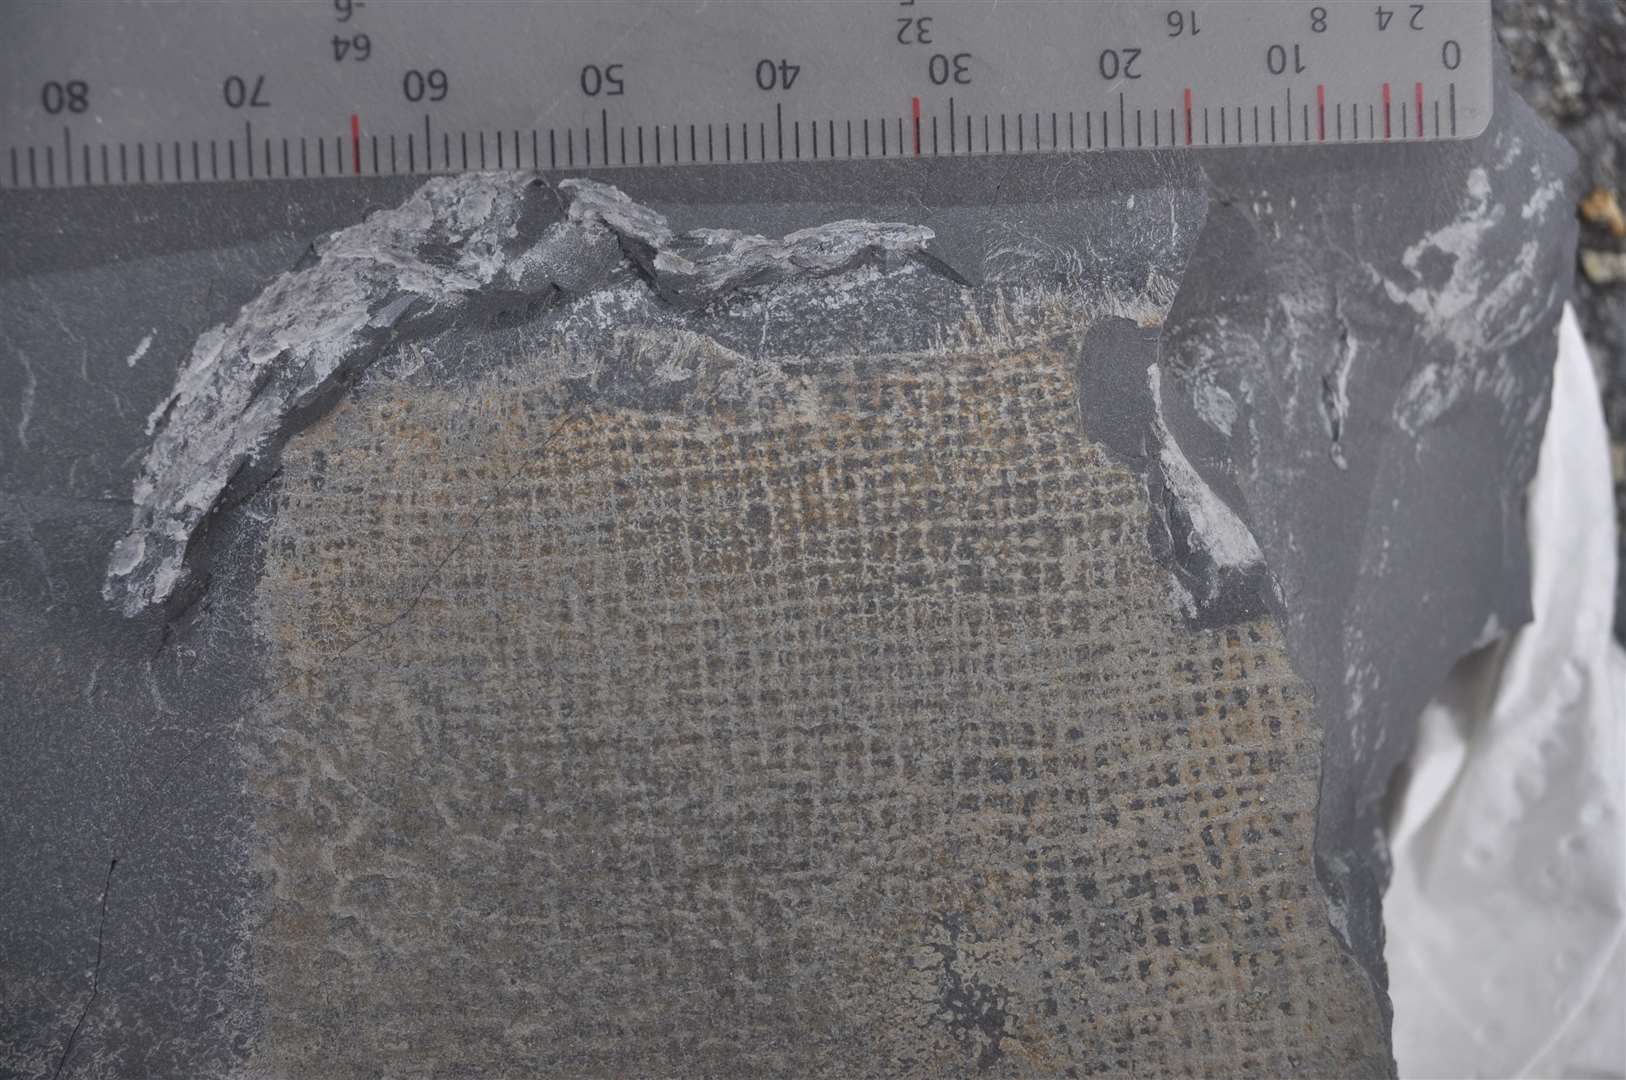 The upper part of the new fossil sponge shows the vertical eyelash-like structures at the very top (Handout/PA)